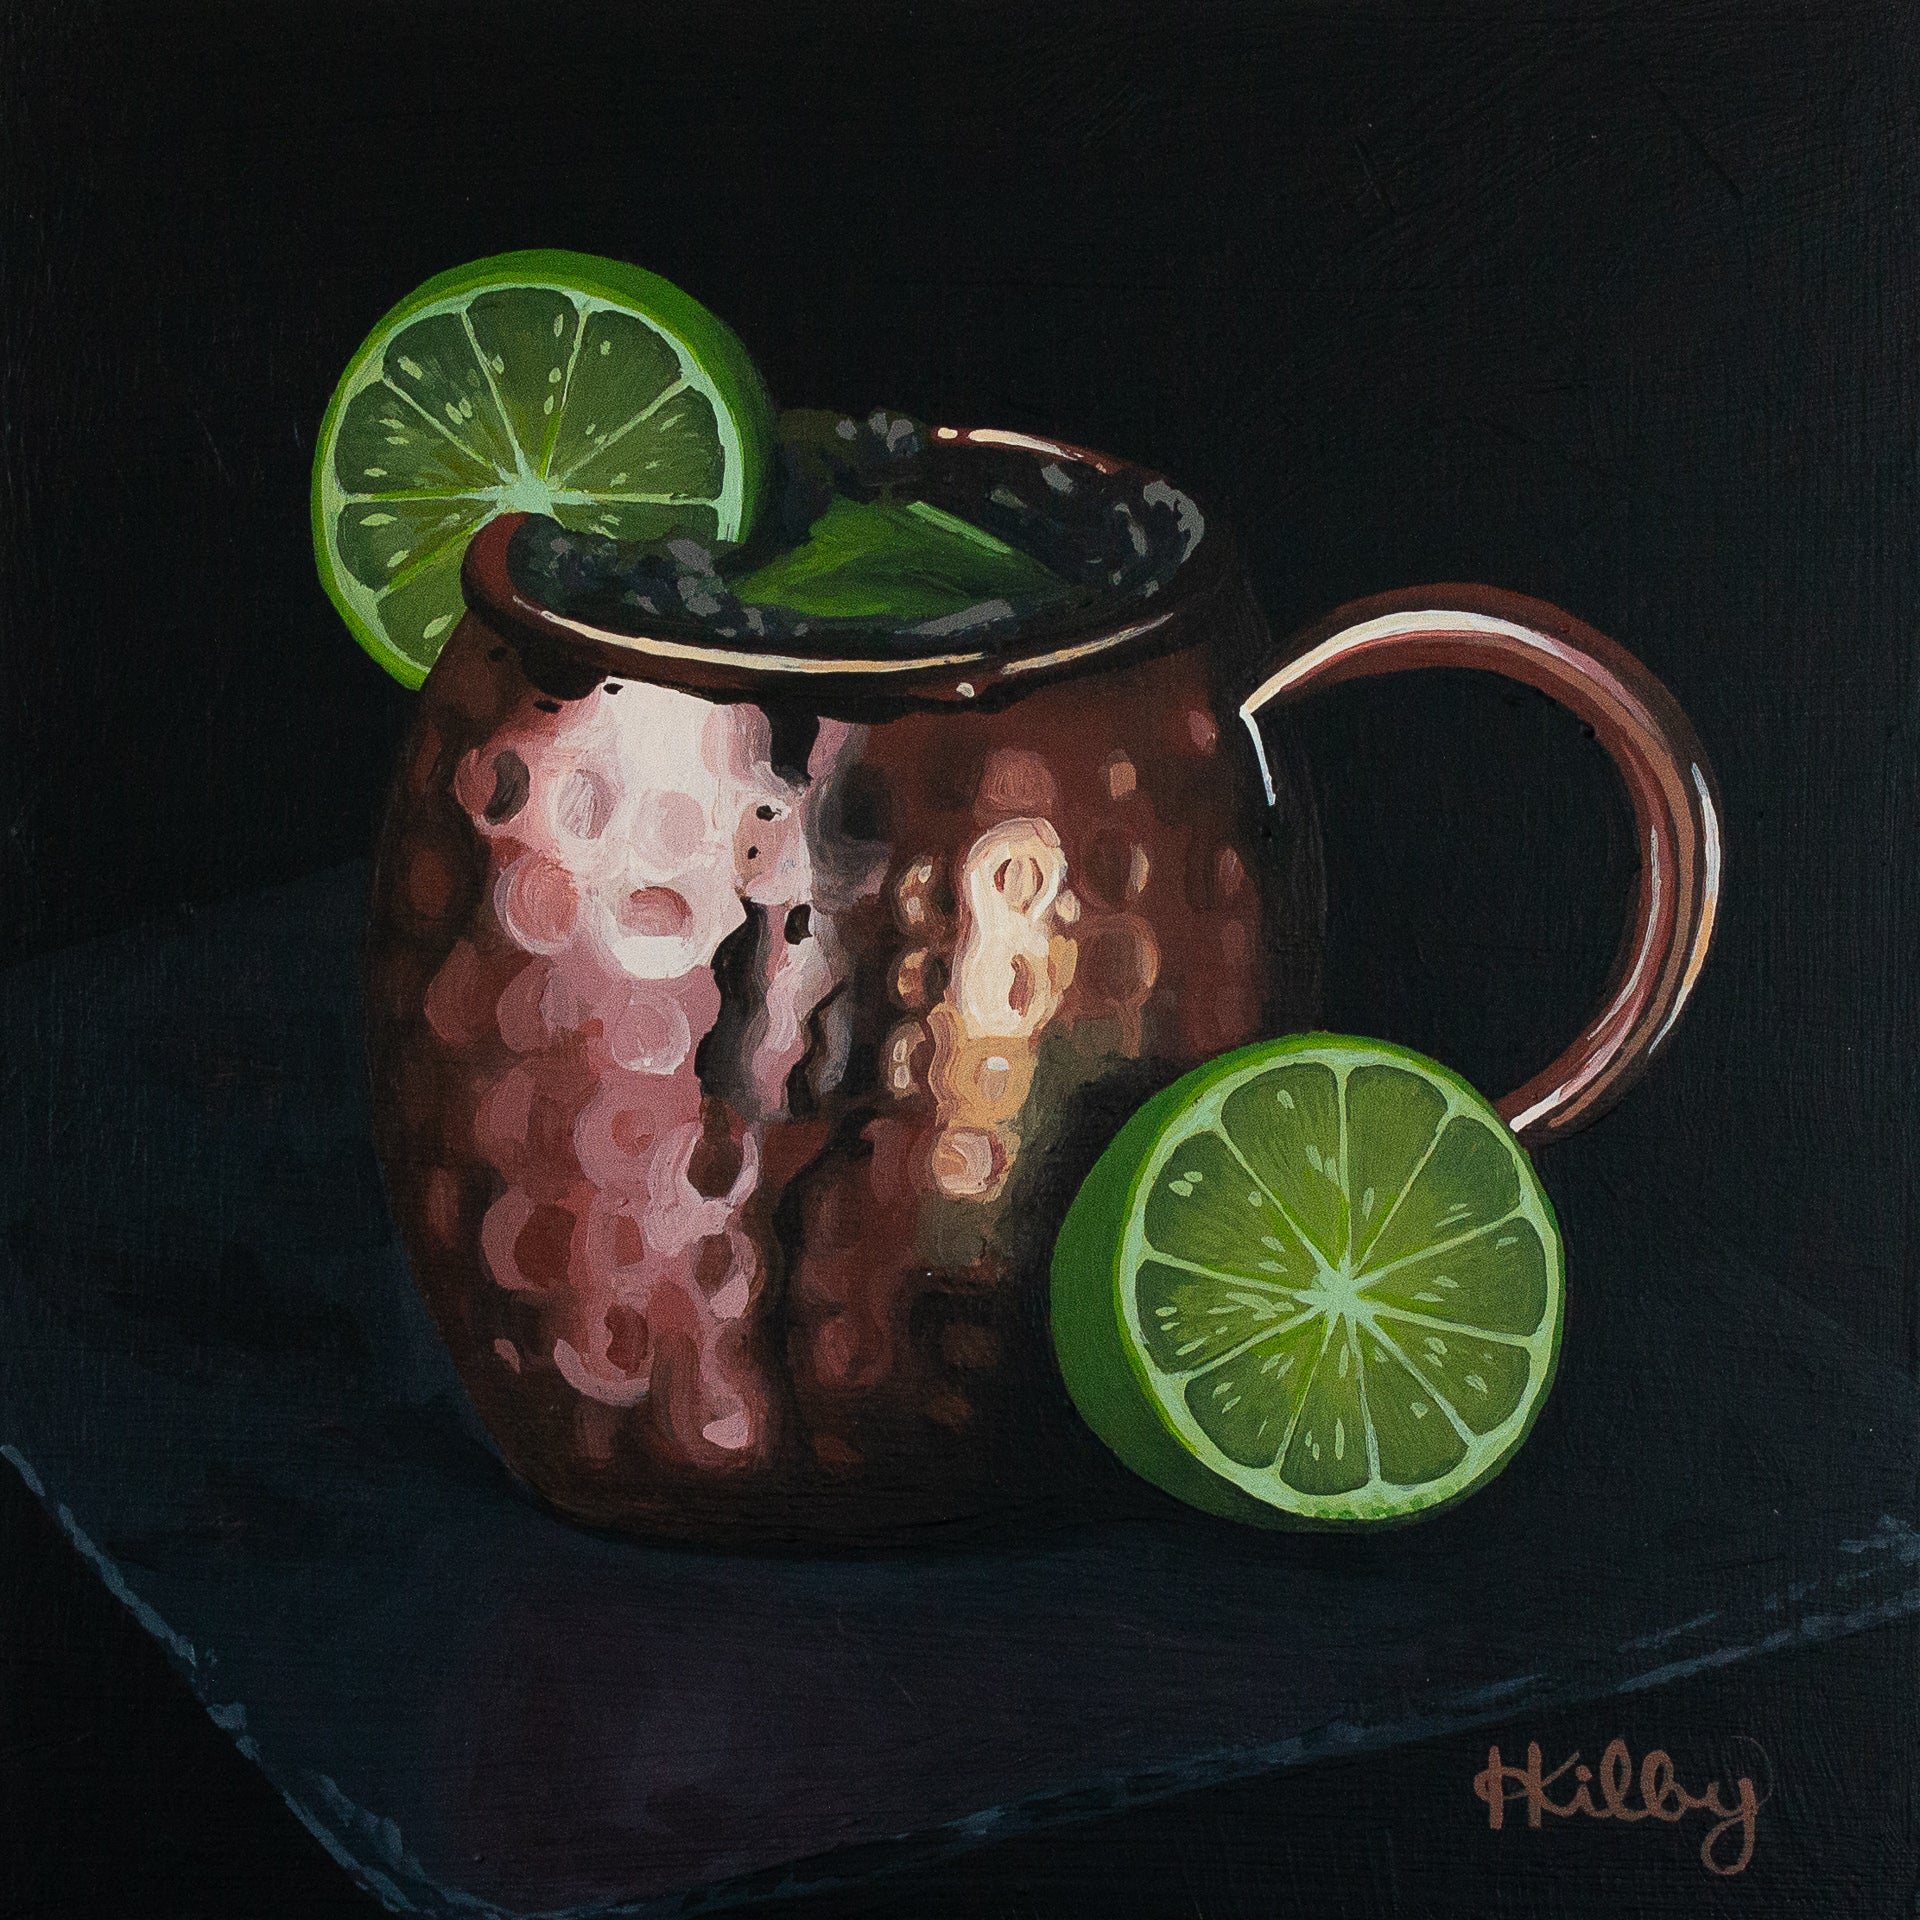 The original acrylic painting "Moscow Mule" by Hannah Kilby from Hannah Michelle Studios.